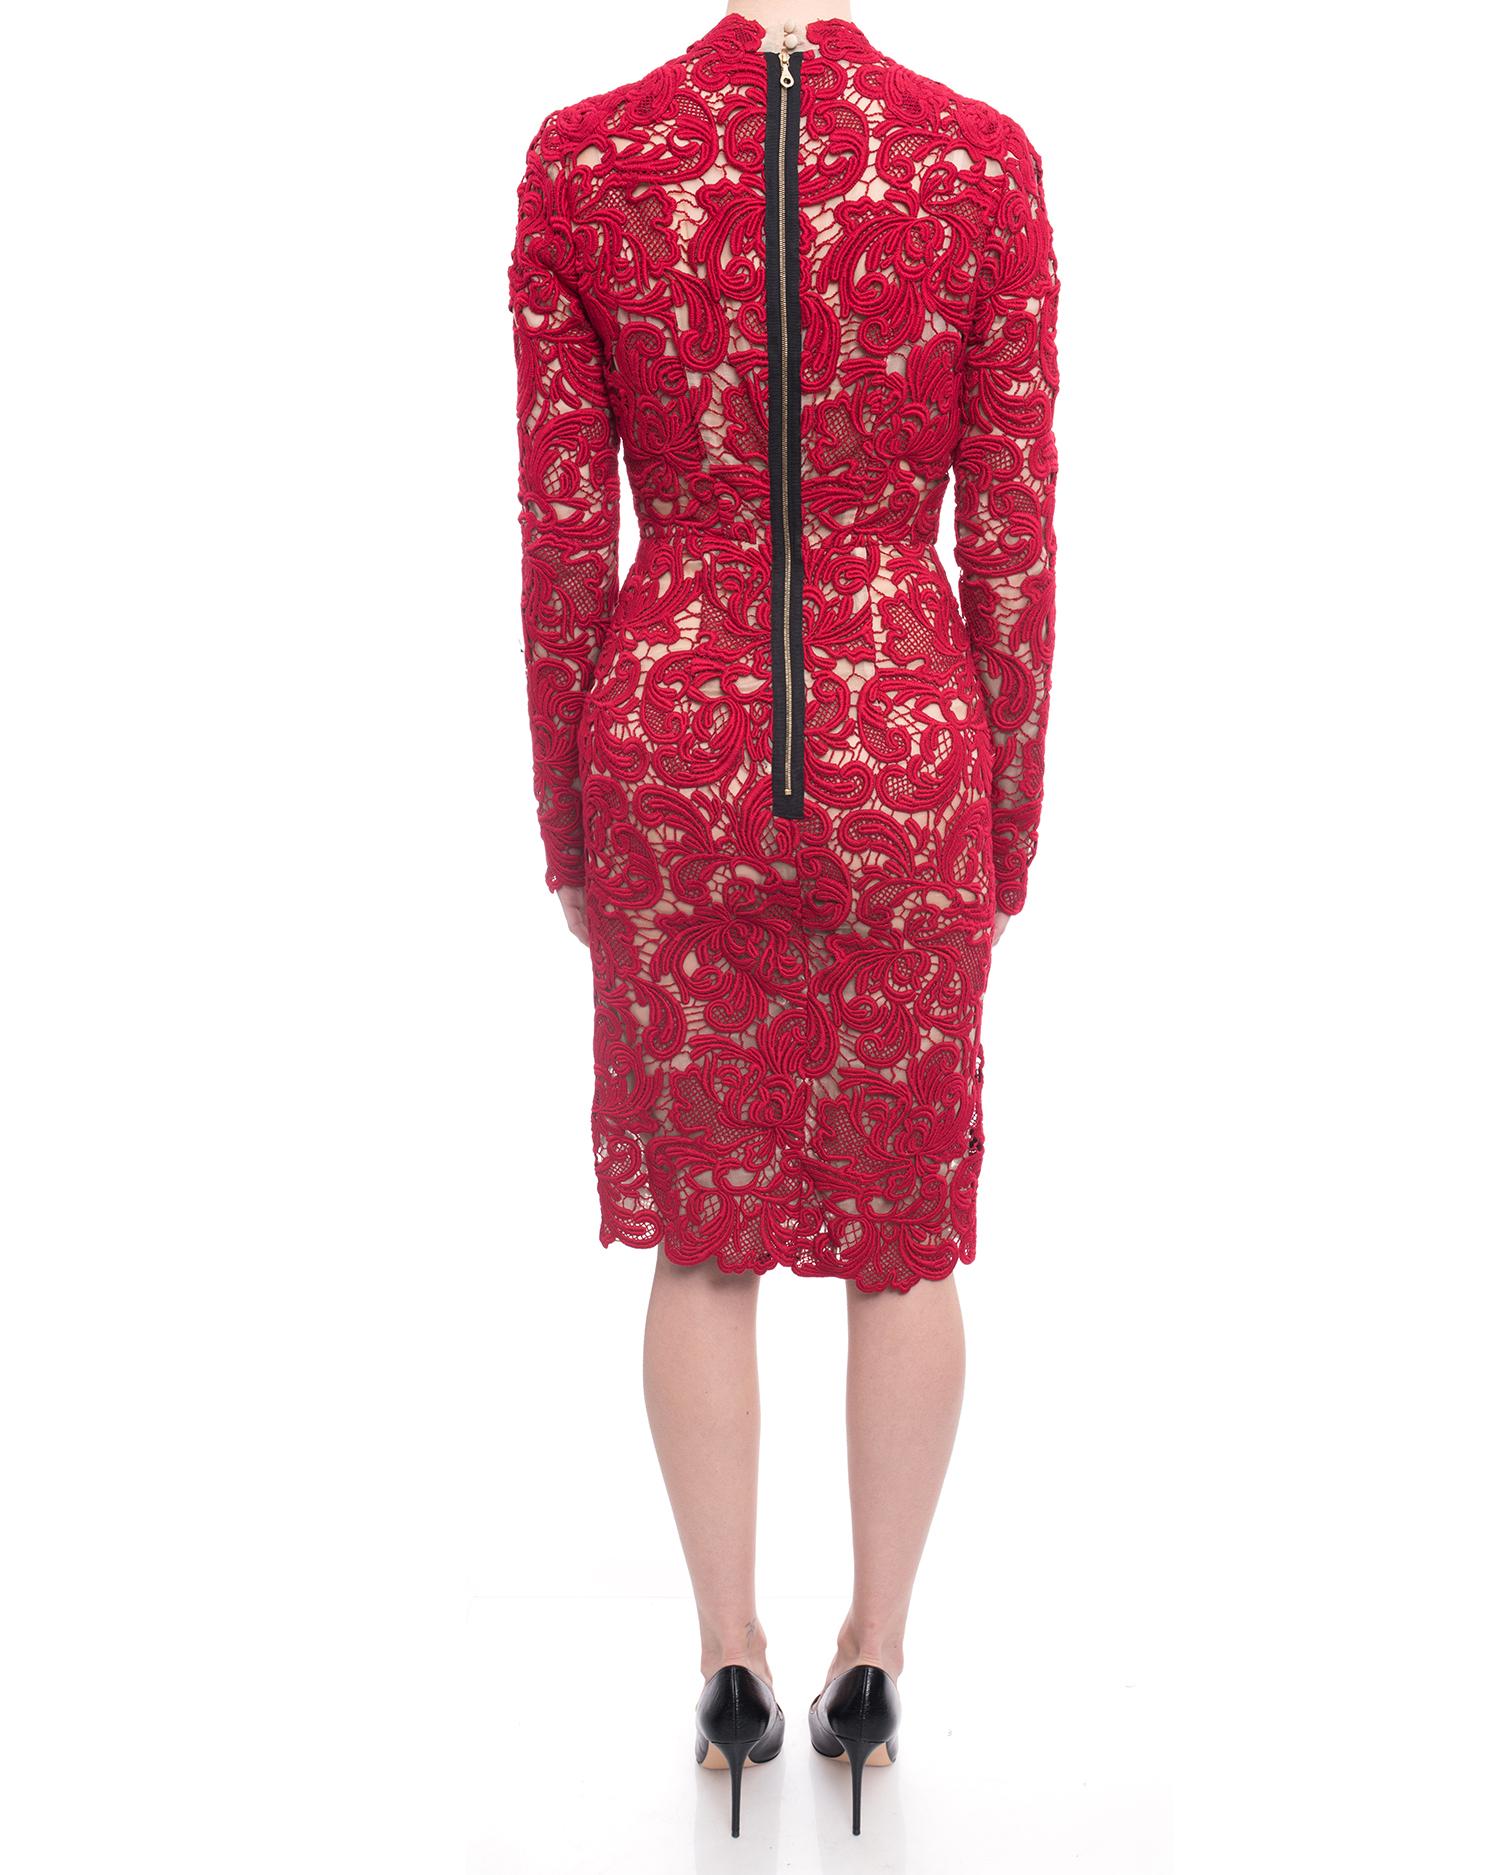 Erdem Fall 2015 Red Guipure Lace Long Sleeve Cocktail Dress - 2/4 2